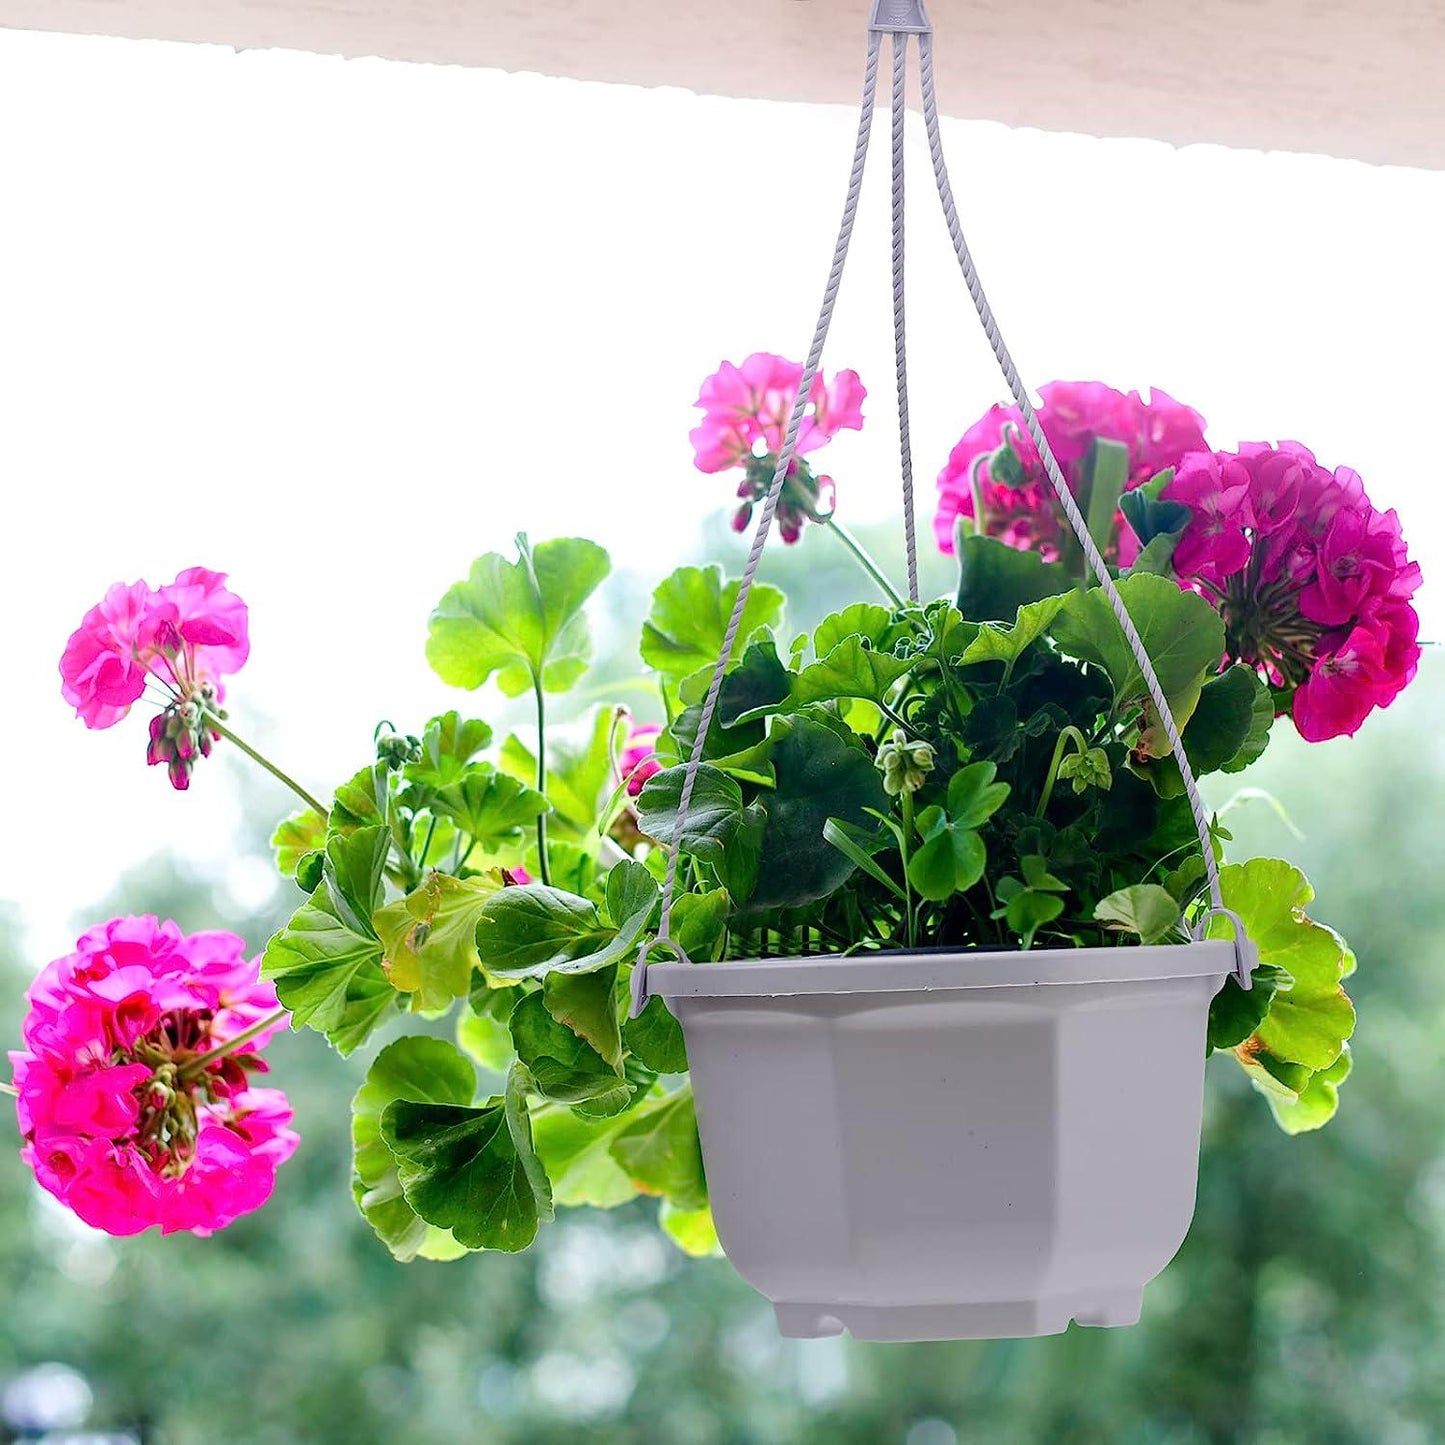 Roshtia 24 Pcs Plastic Hanging Planter Hanging Flower Plant Pots with Hook Hanging Pot for Plants Hanging Plant Basket Chain Basket Planter Holder for Outdoor Indoor Plant and Garden Balcony, White